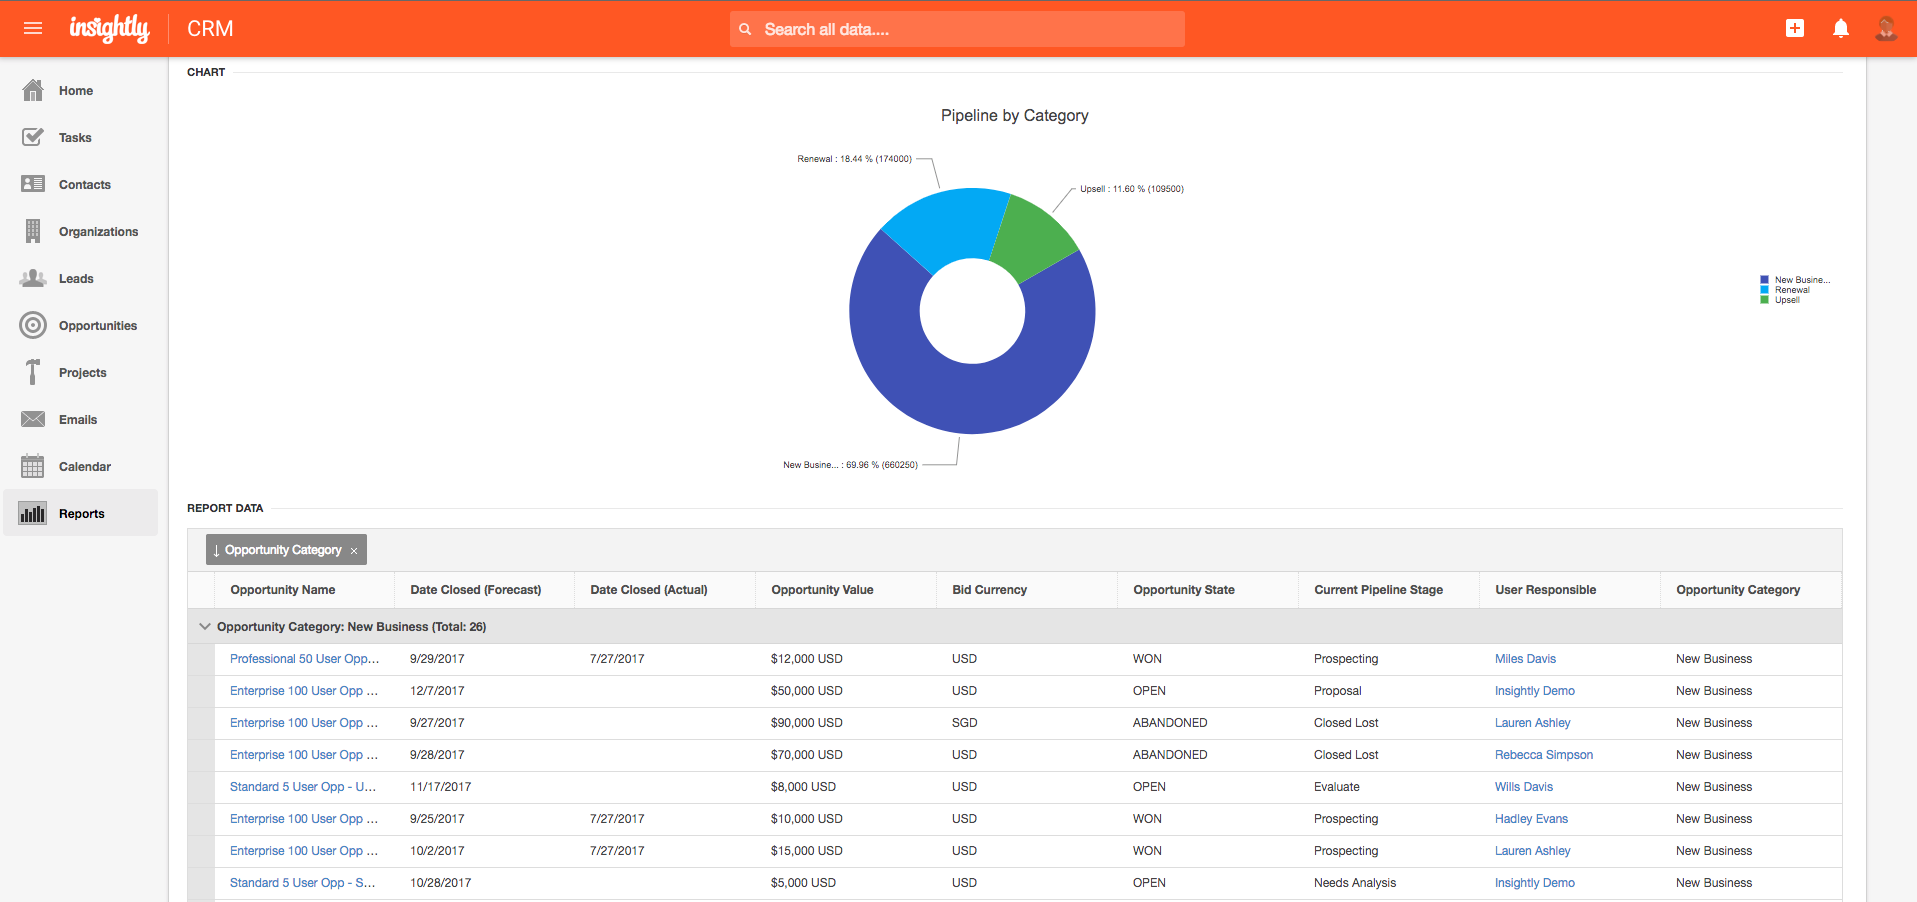 Insightly Software - Reports provide insight into sales and productivity performance